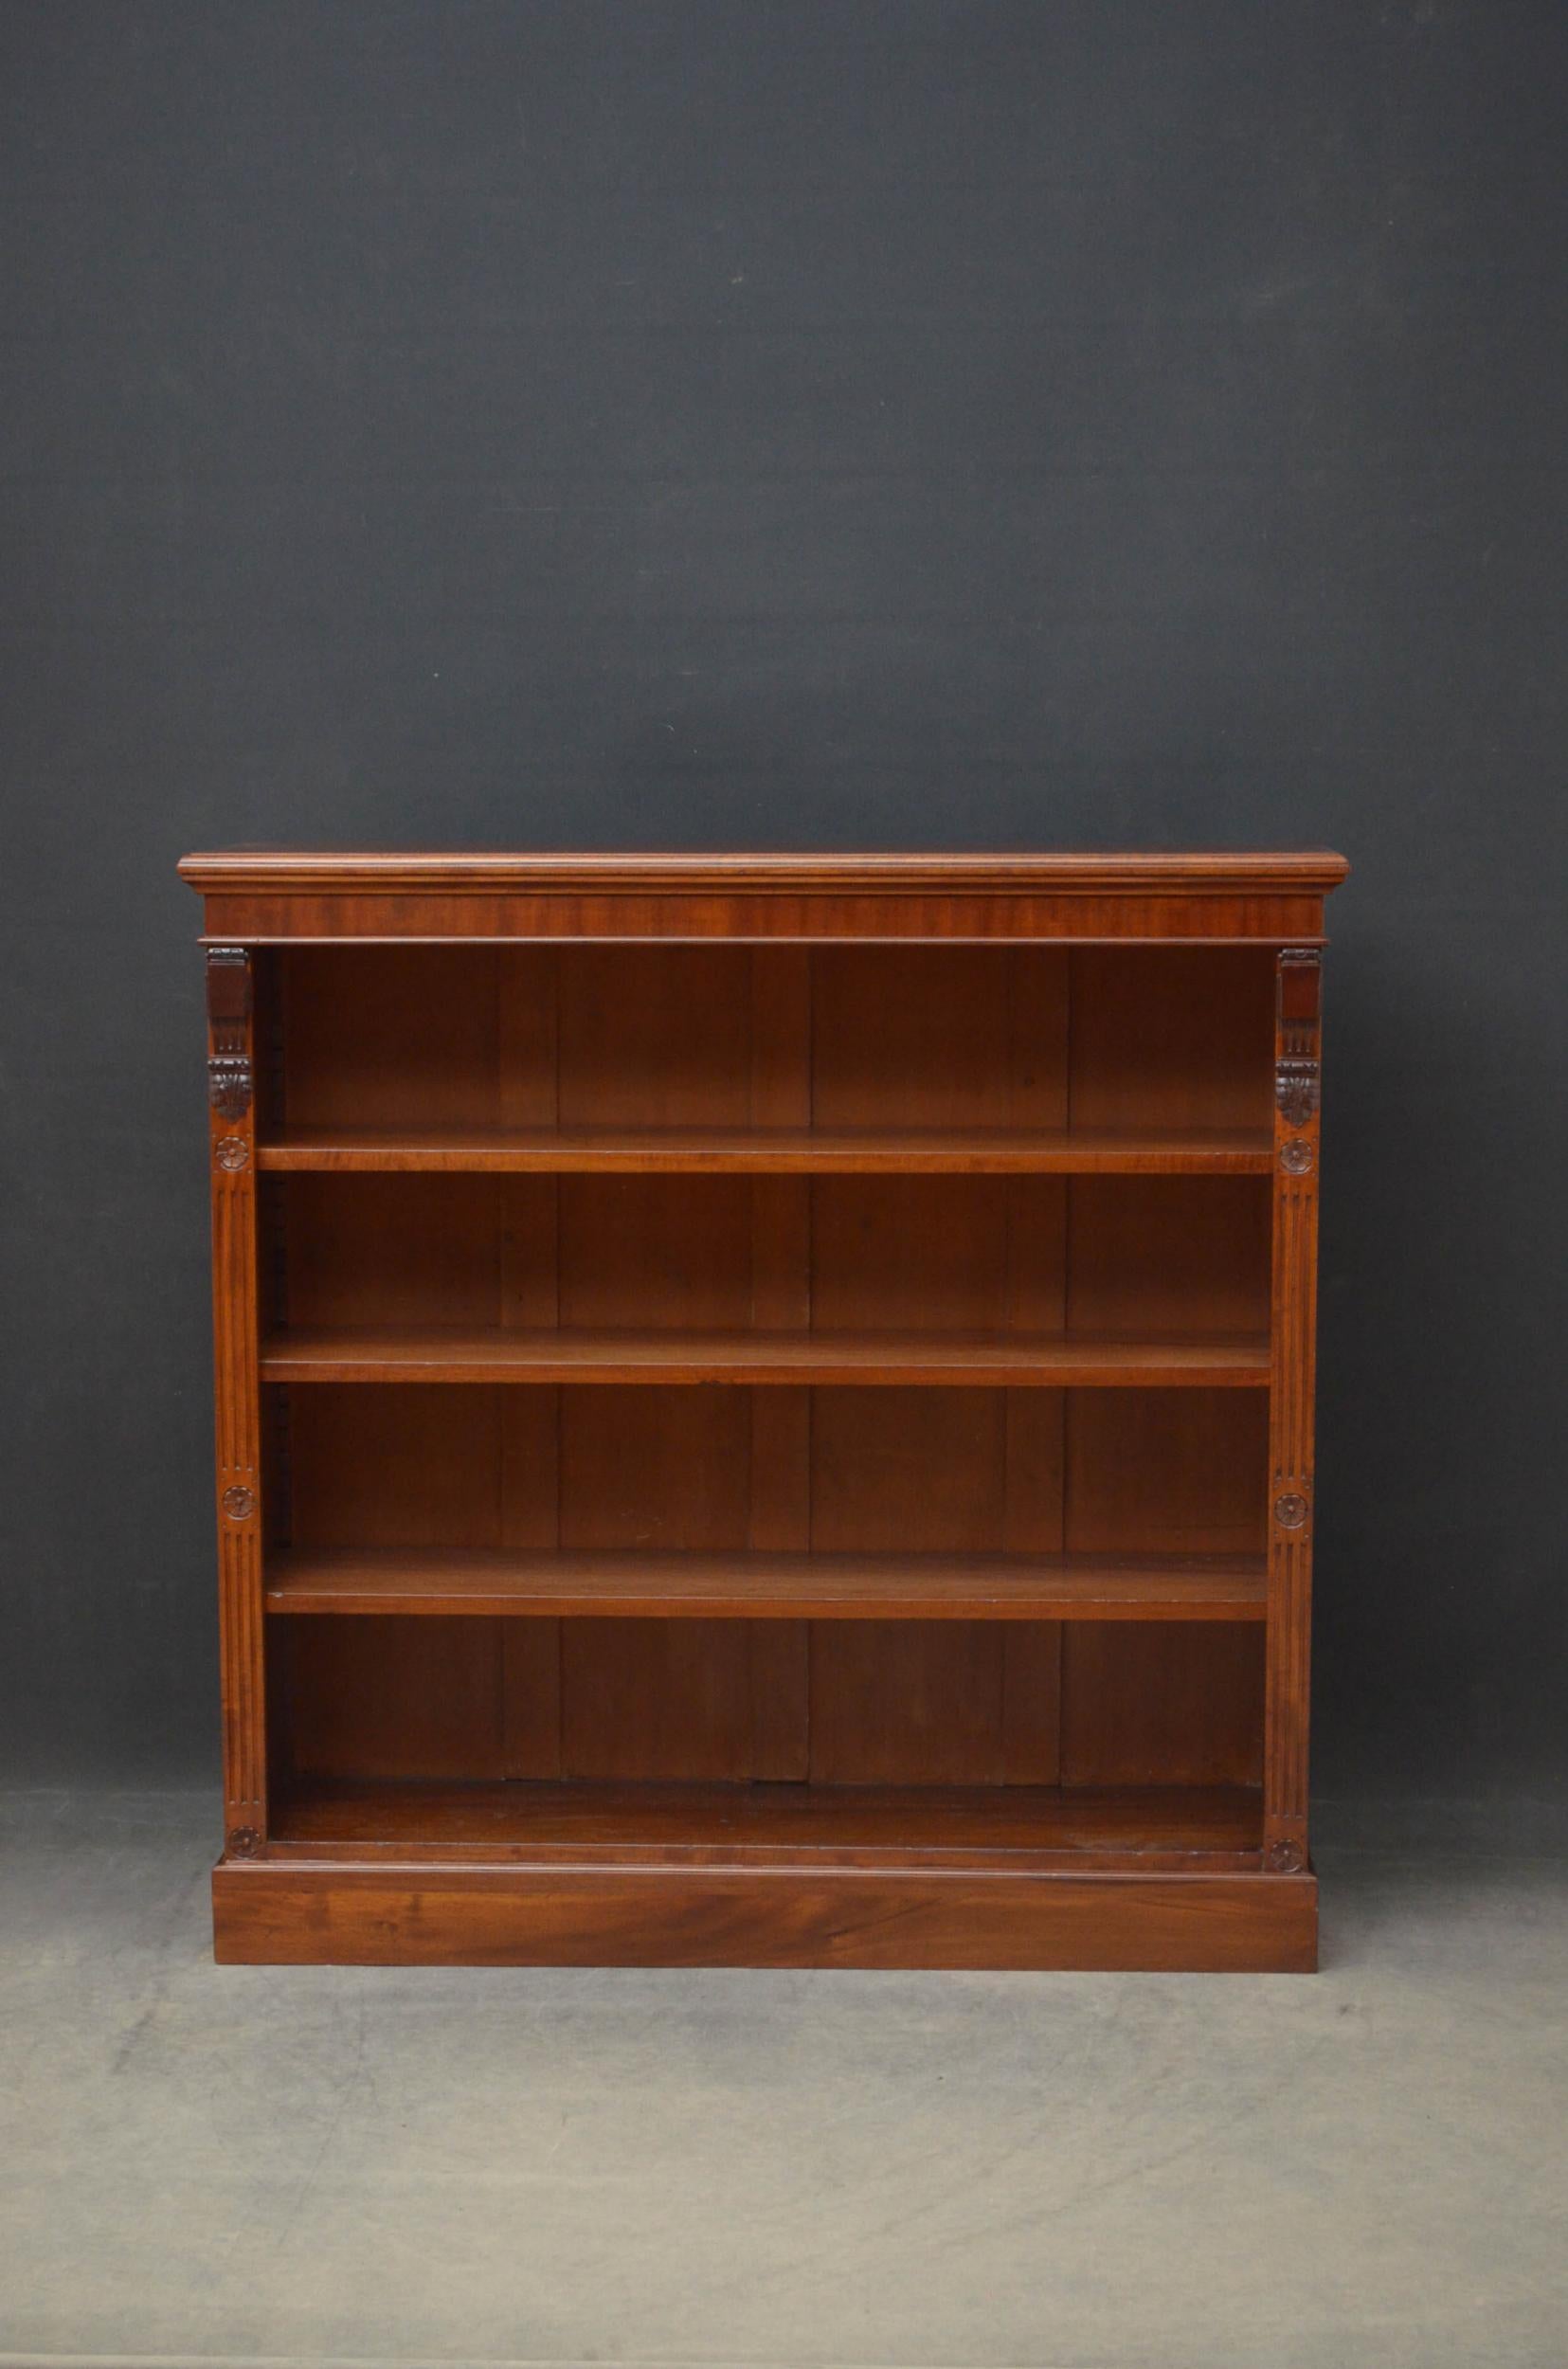 Sn4754, fine quality Victorian open bookcase in mahogany, having very attractive figured mahogany sides and figured mahogany top with moulded edge, above three height adjustable shelves all flanked by drop carving, reeded pilaster and carved